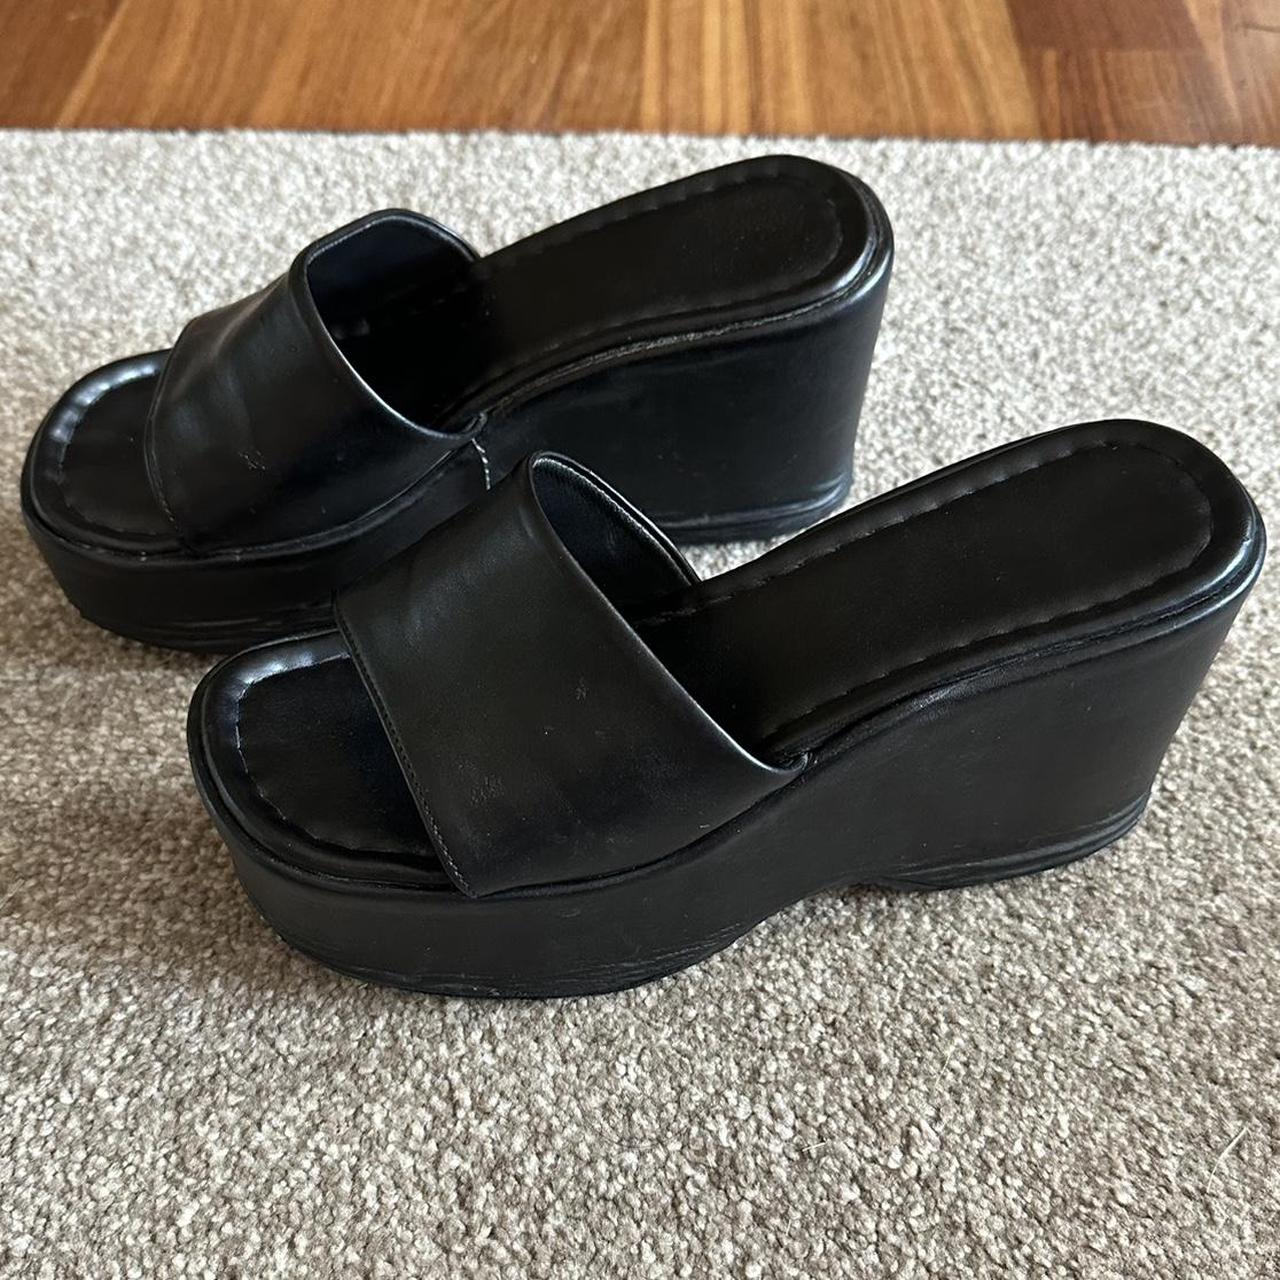 2000s platform sandles with thick strap across the... - Depop